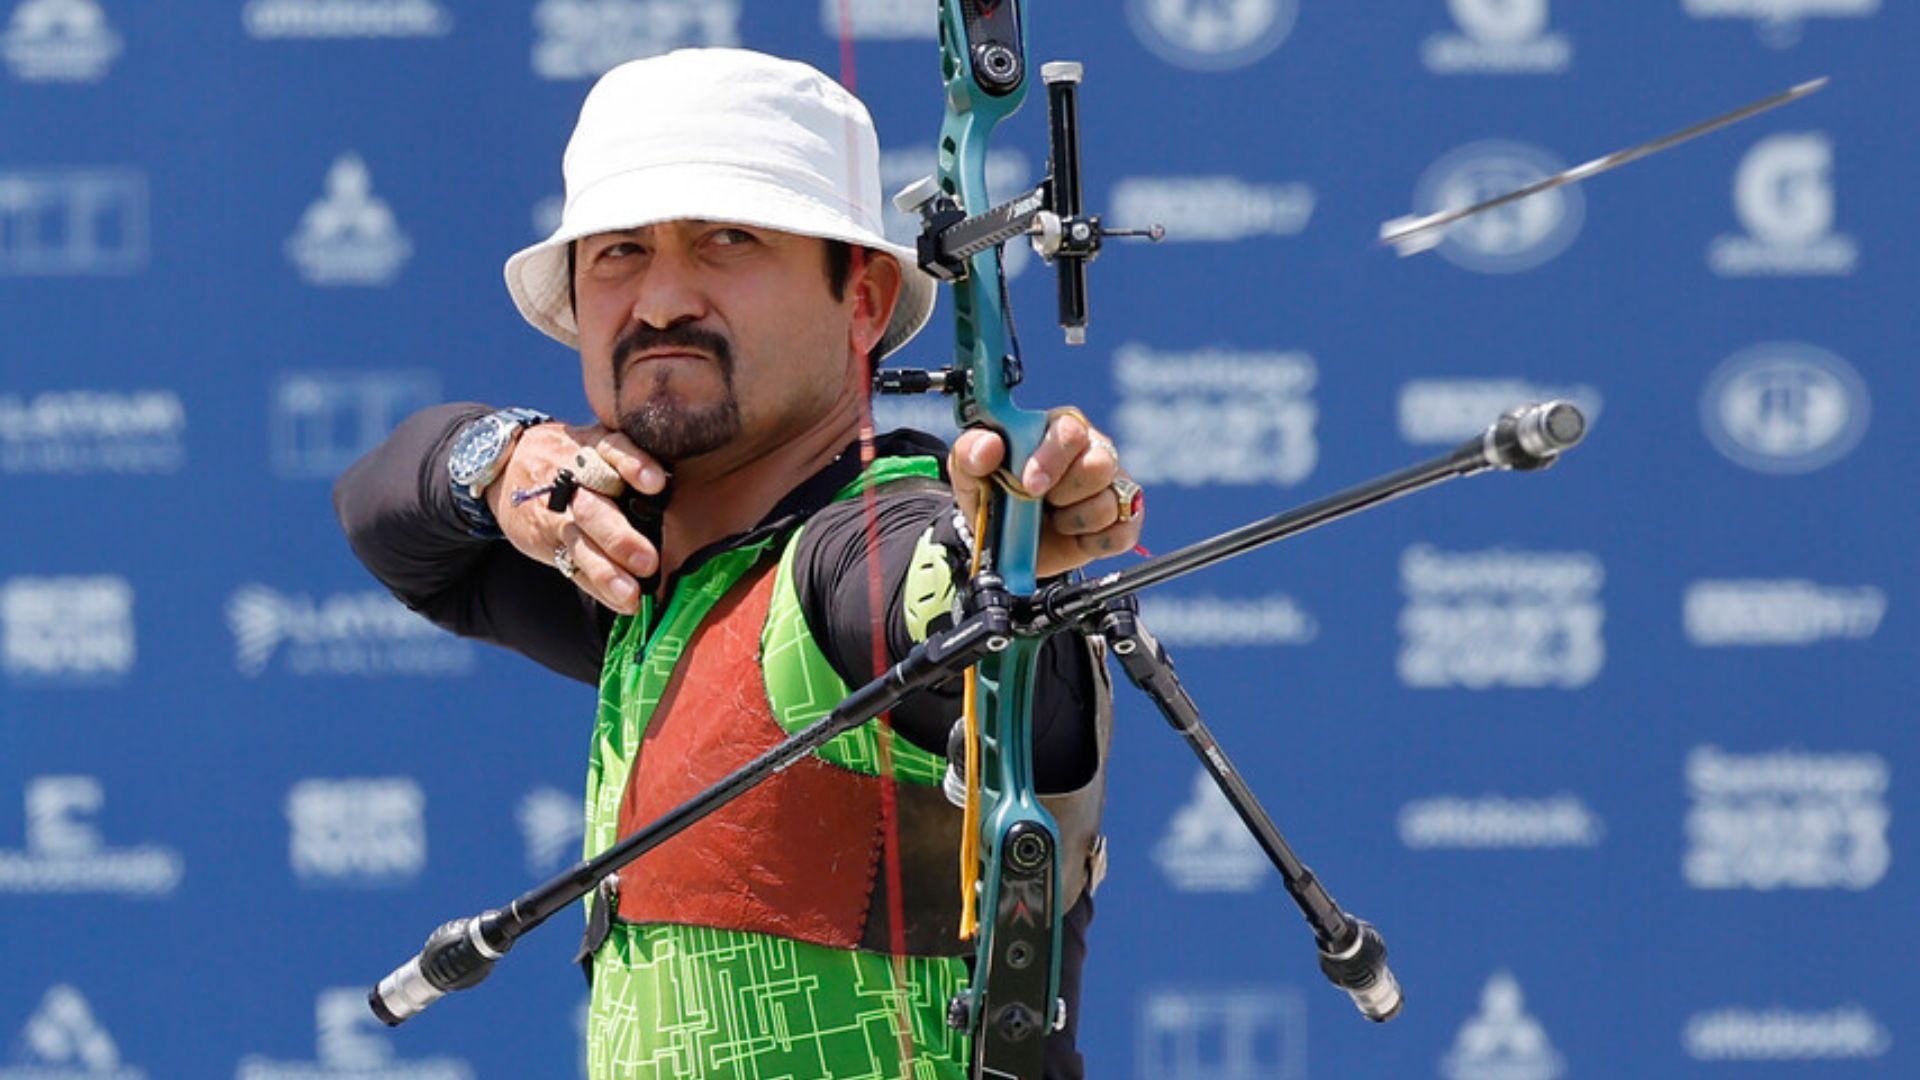 Para Archery: Mexican Samuel Molina Wins the Gold in Male Recurve Open